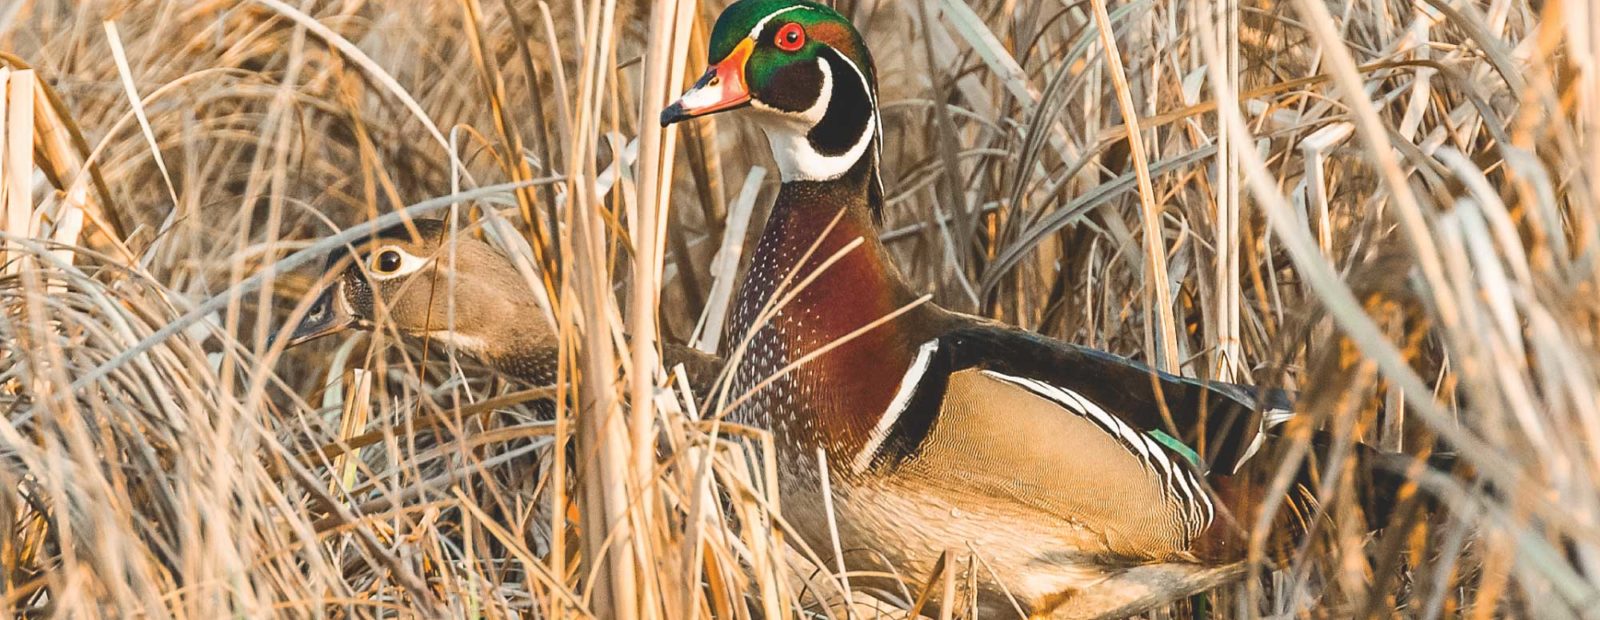 A wood duck in reeds